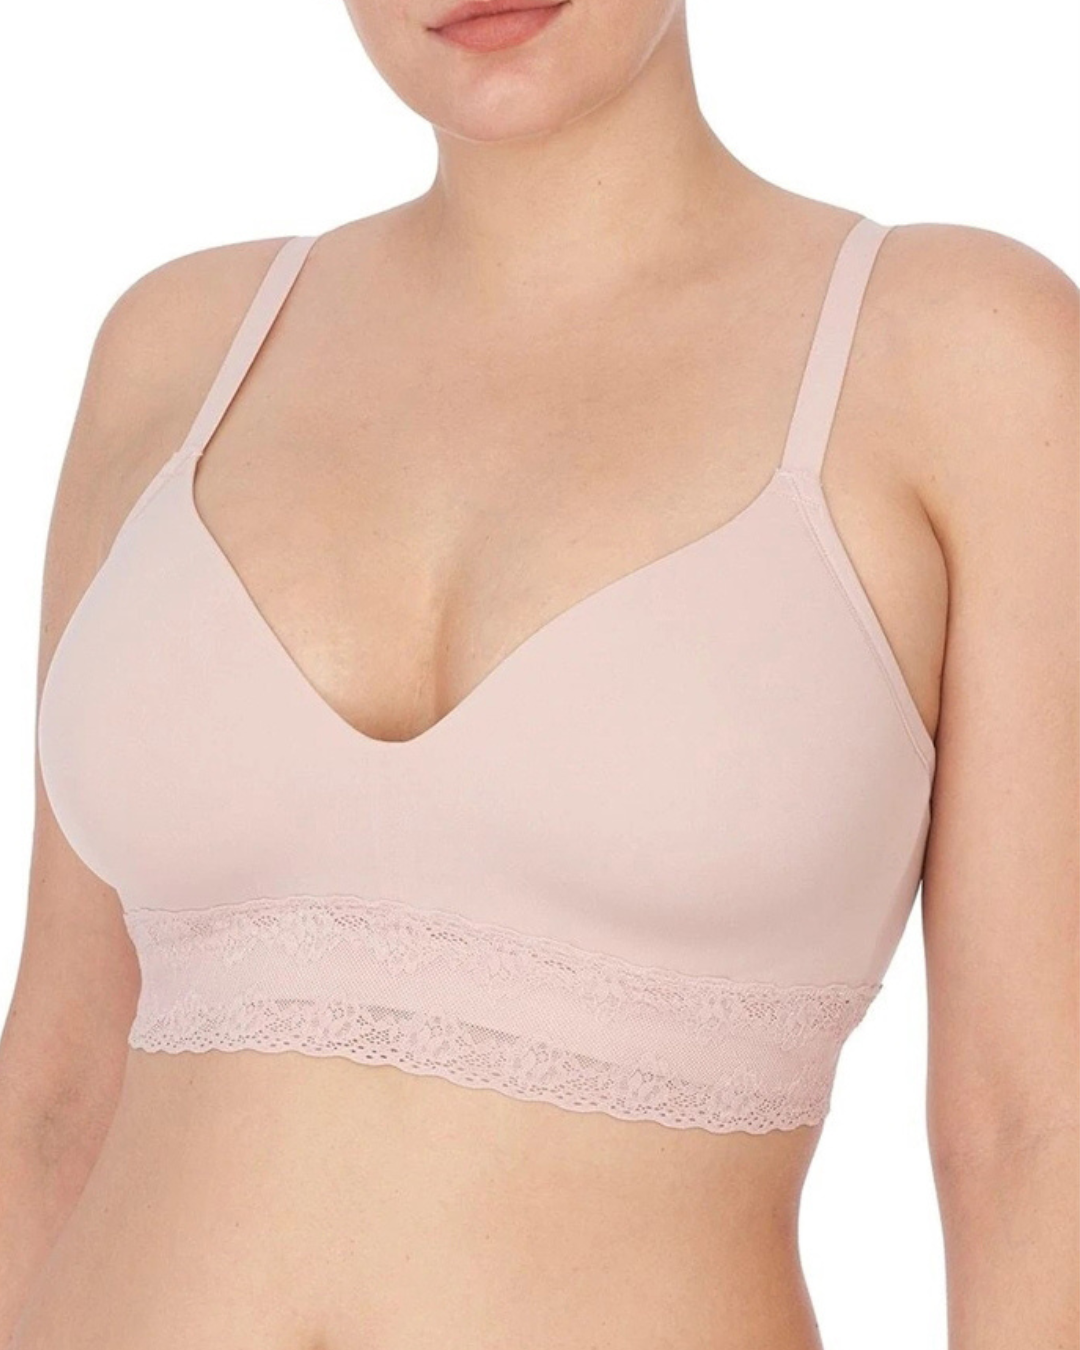 Model wearing a wire free t-shirt bra with a lace band in blush pink